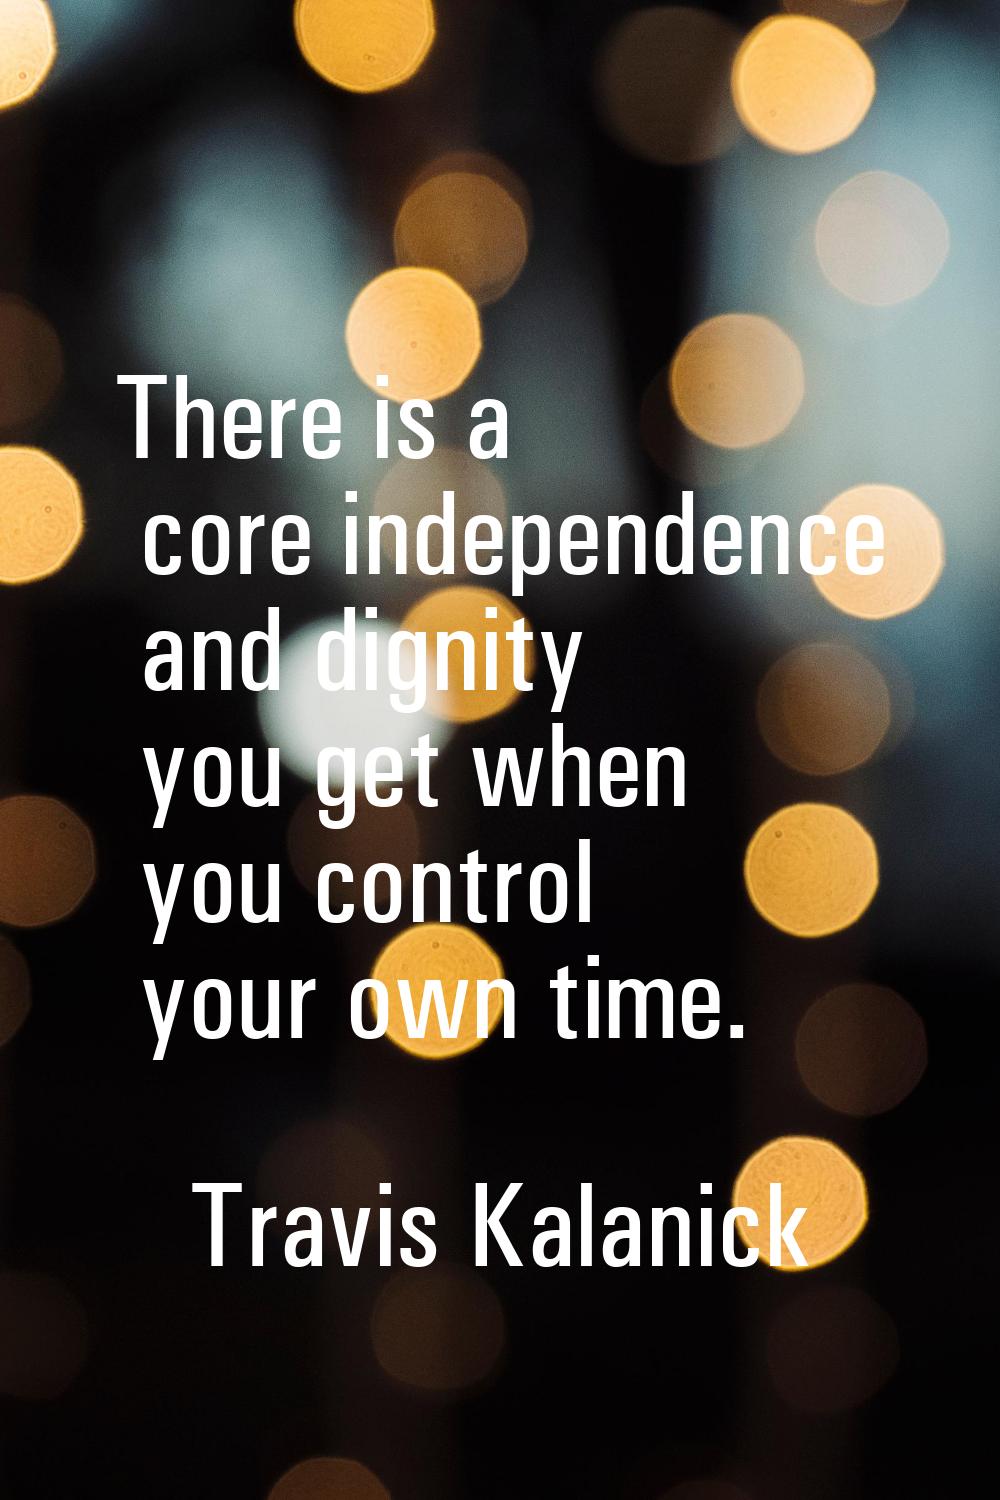 There is a core independence and dignity you get when you control your own time.